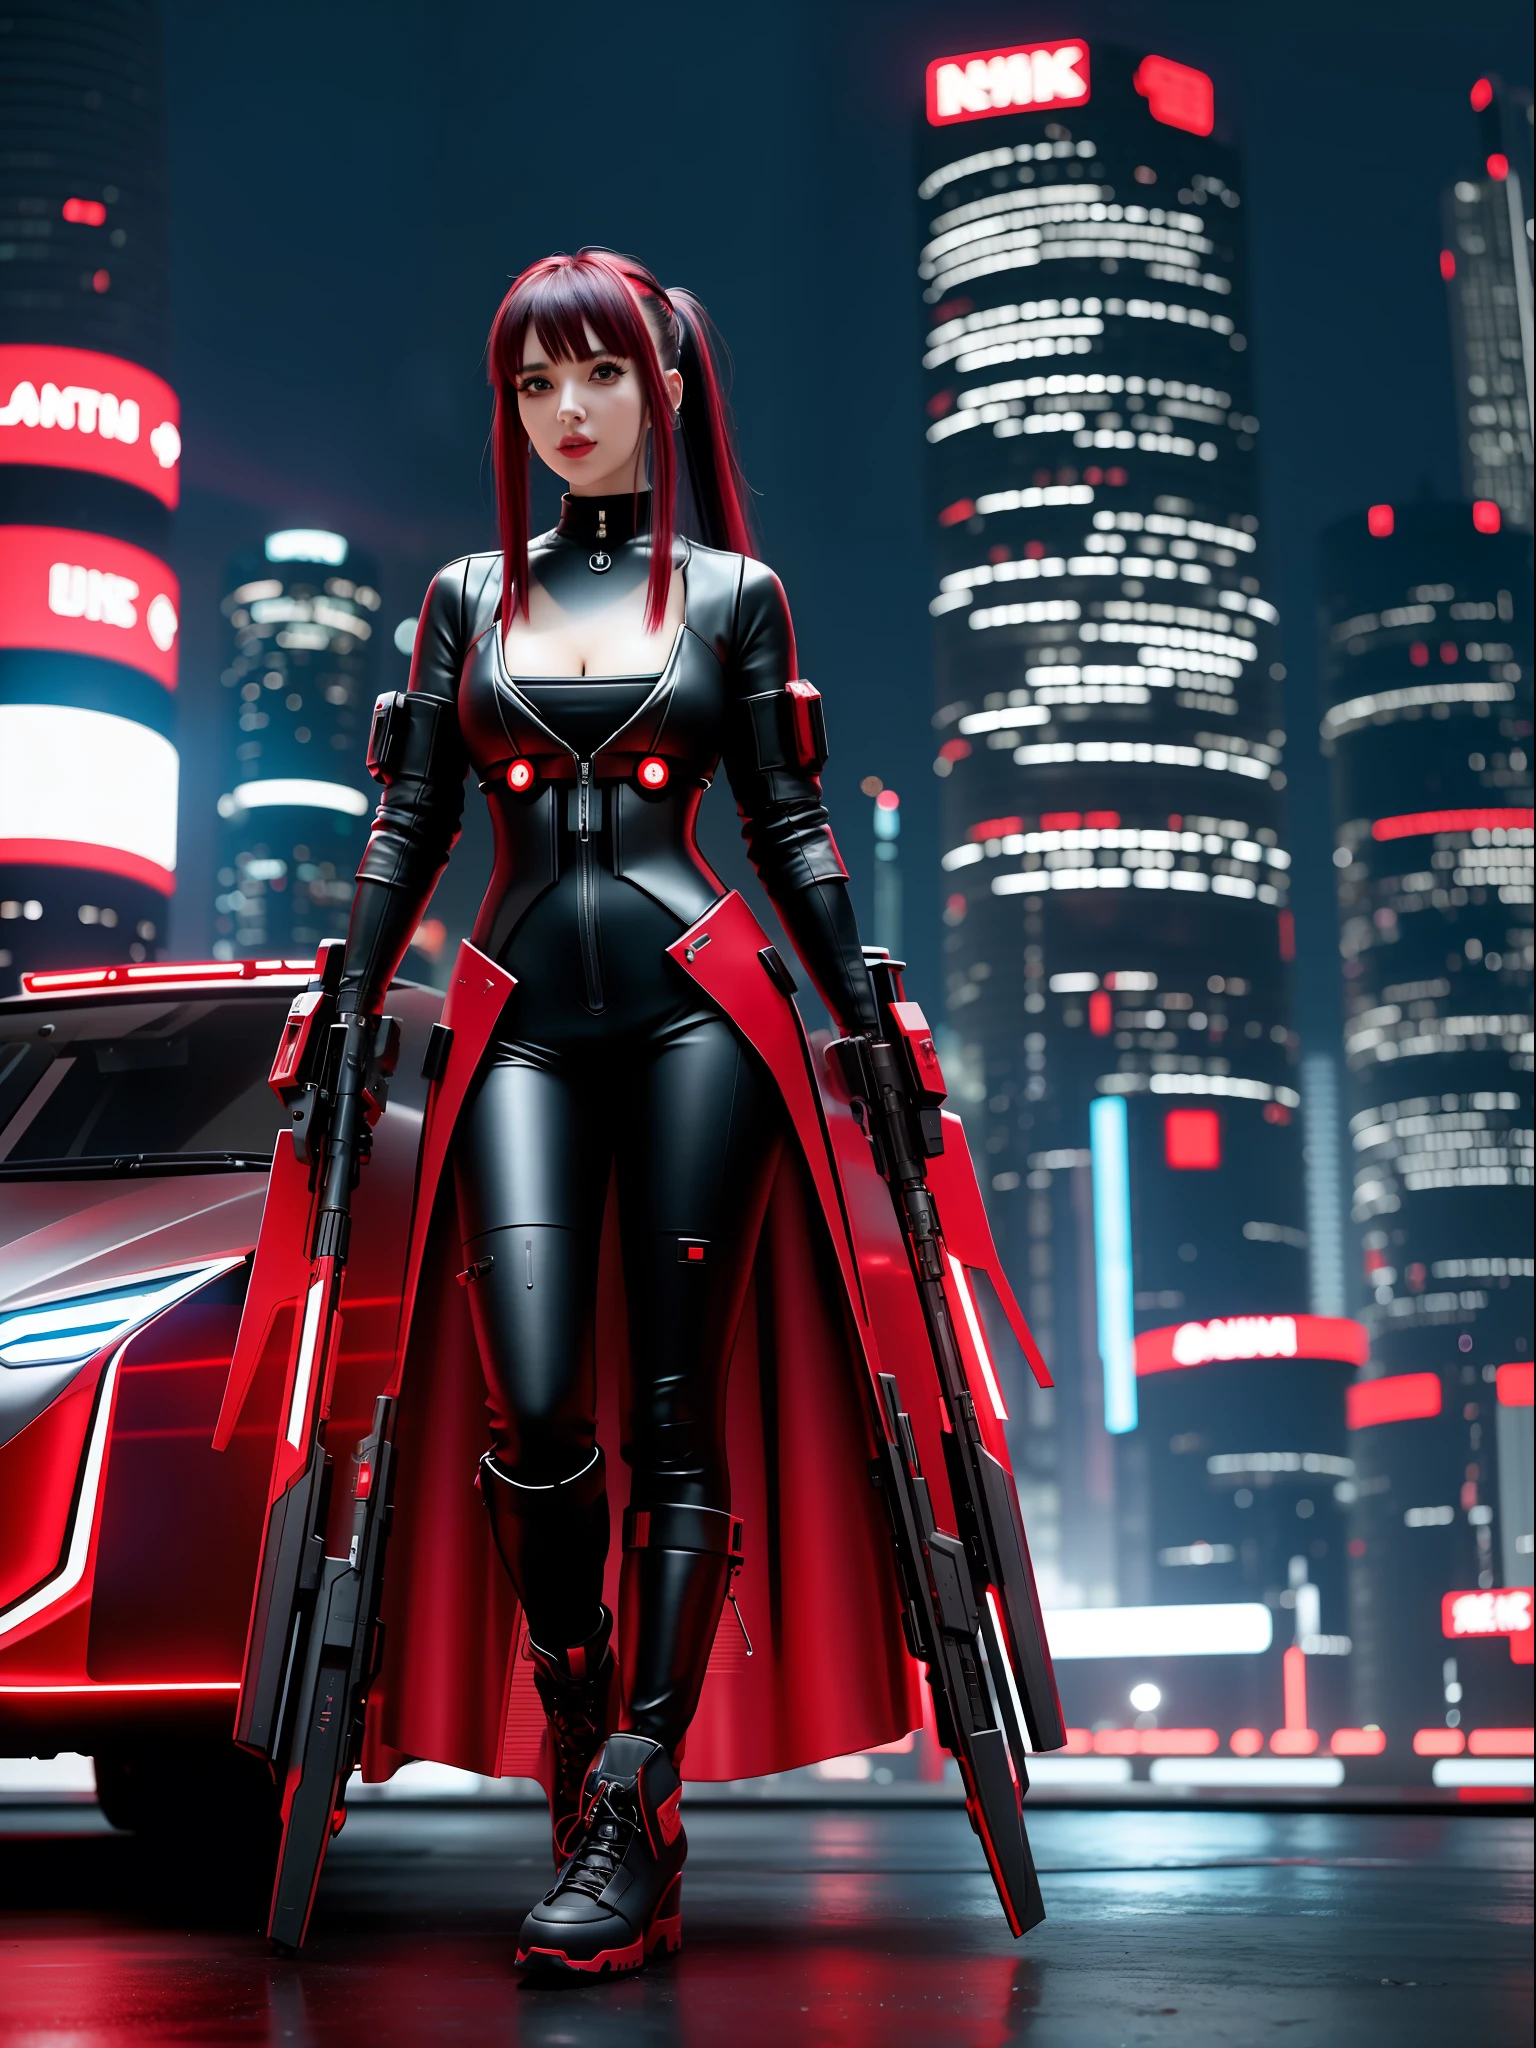 (full body photo:1.7), (A Kawaii Woman:1.5), (wearing cyberpunk red metal+ultra realistic metal outfit:1.5), (she's in a futuristic city with lots of flying cars+at night+raining hard:1.5), (she has mohawk hair roza:1.3), (she has blue eyes:1.3), (she's holding futuristic weapons+sorting+staring at the viewer:1.5),  Hyperrealism, 16k, best quality, high details, UHD